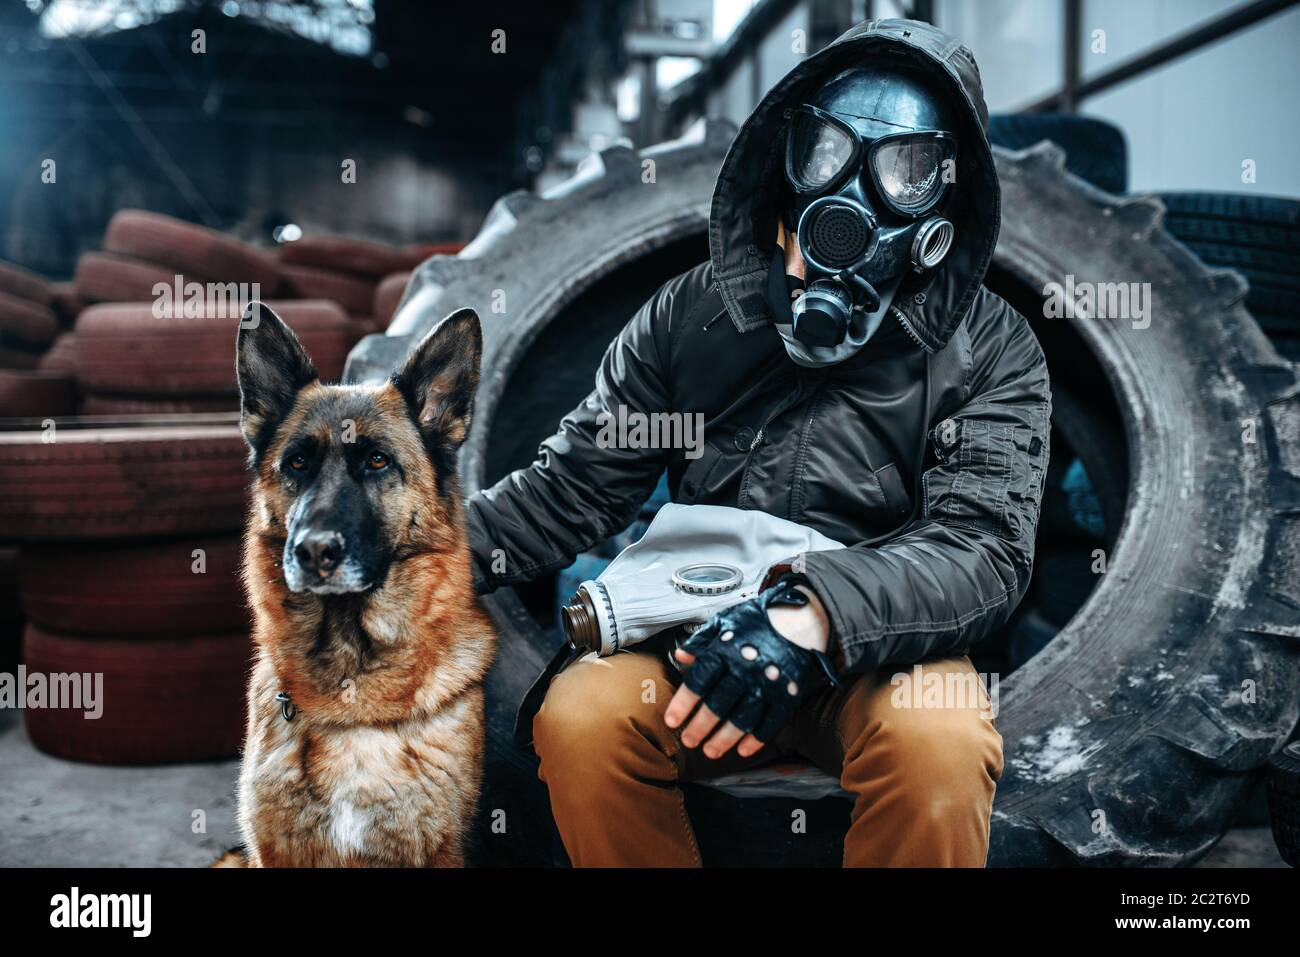 Stalker in gas mask and dog, friends in post apocalyptic world. Post-apocalypse lifestyle on ruins, doomsday, judgment day Stock Photo